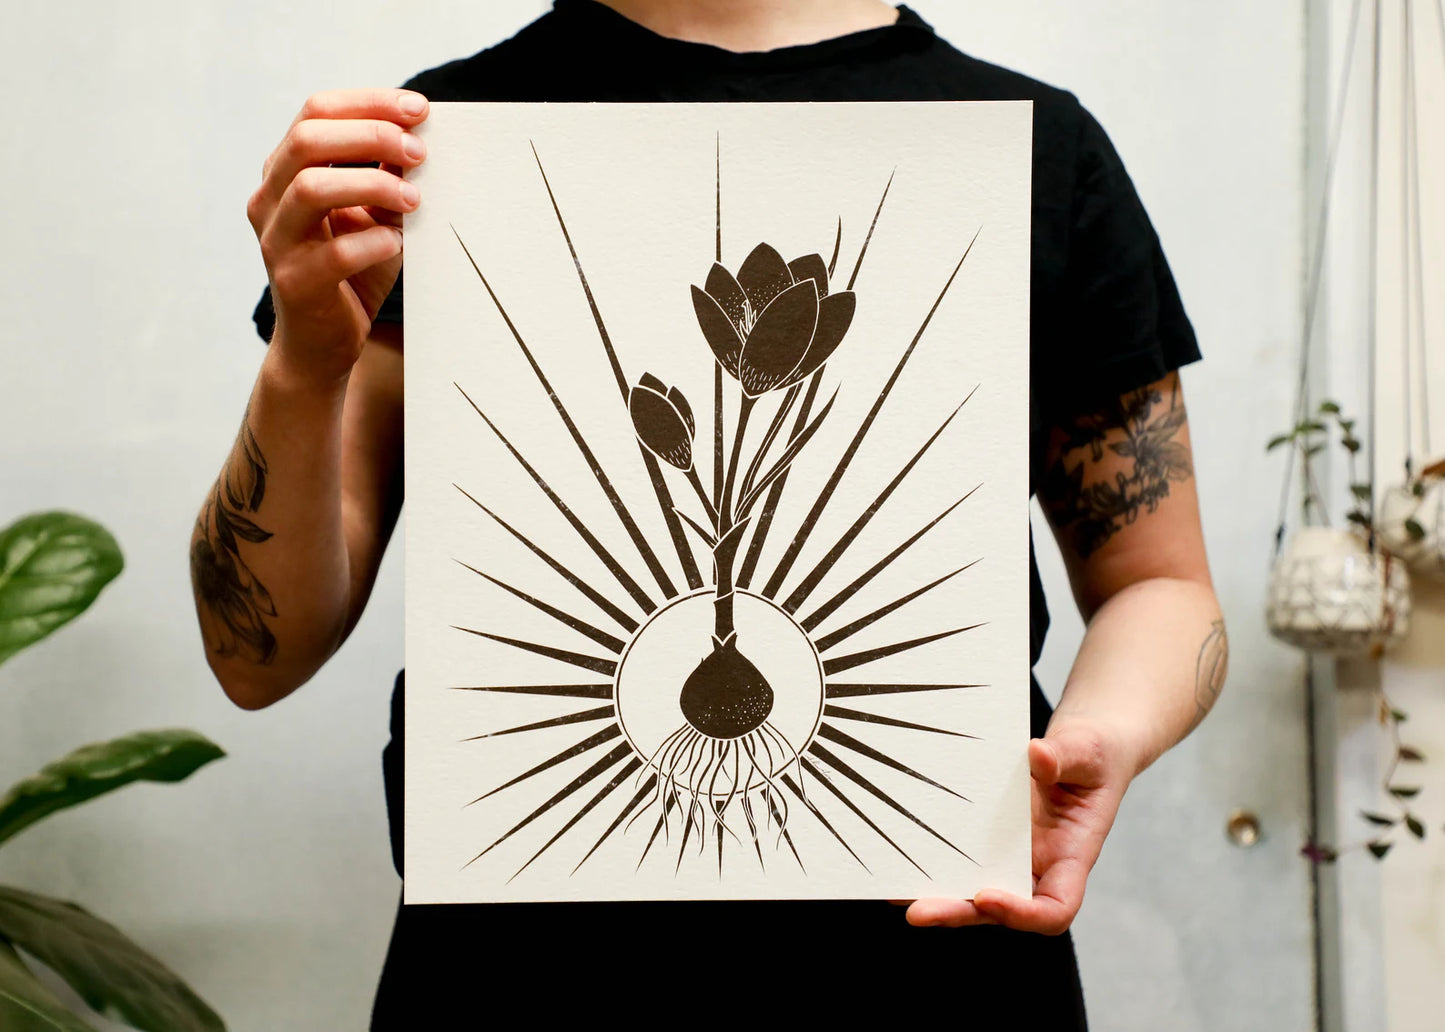 Radiant Crocus Print. 8x10 inches or 11x14 inches.